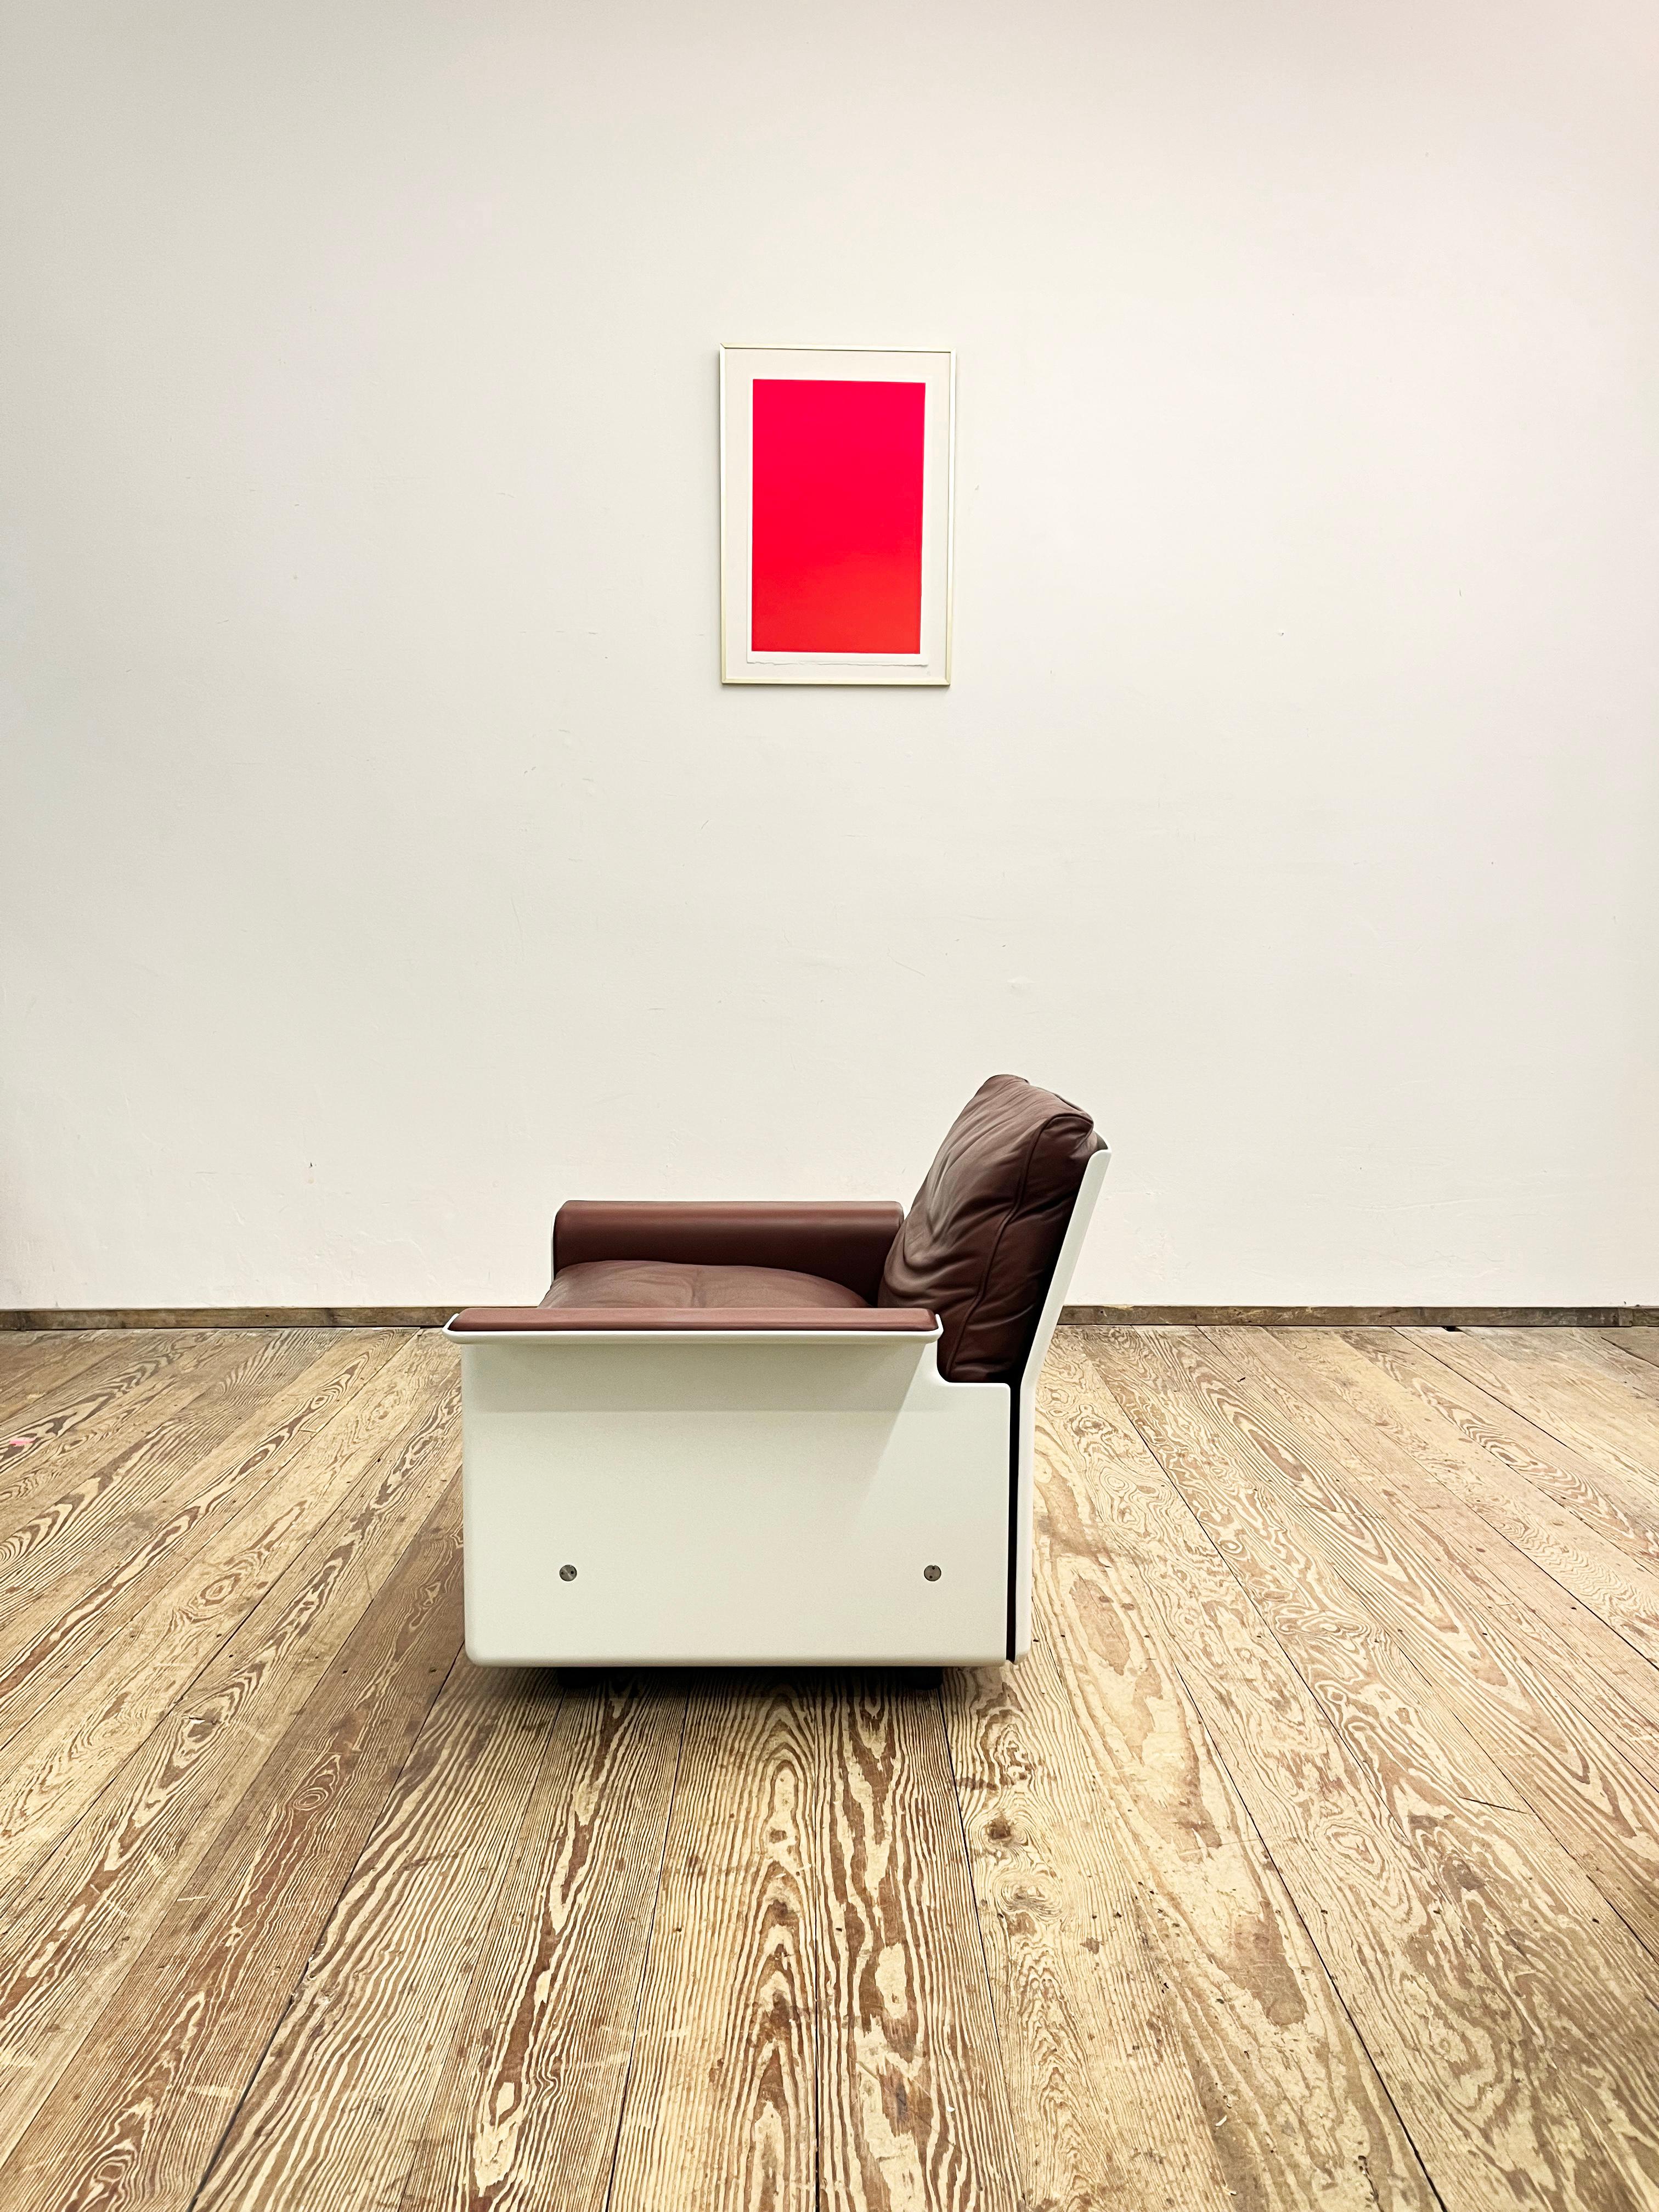 Leather Mid-Century Lounge or Armchair by Dieter Rams for Vitsoe, German Design, 1960s For Sale